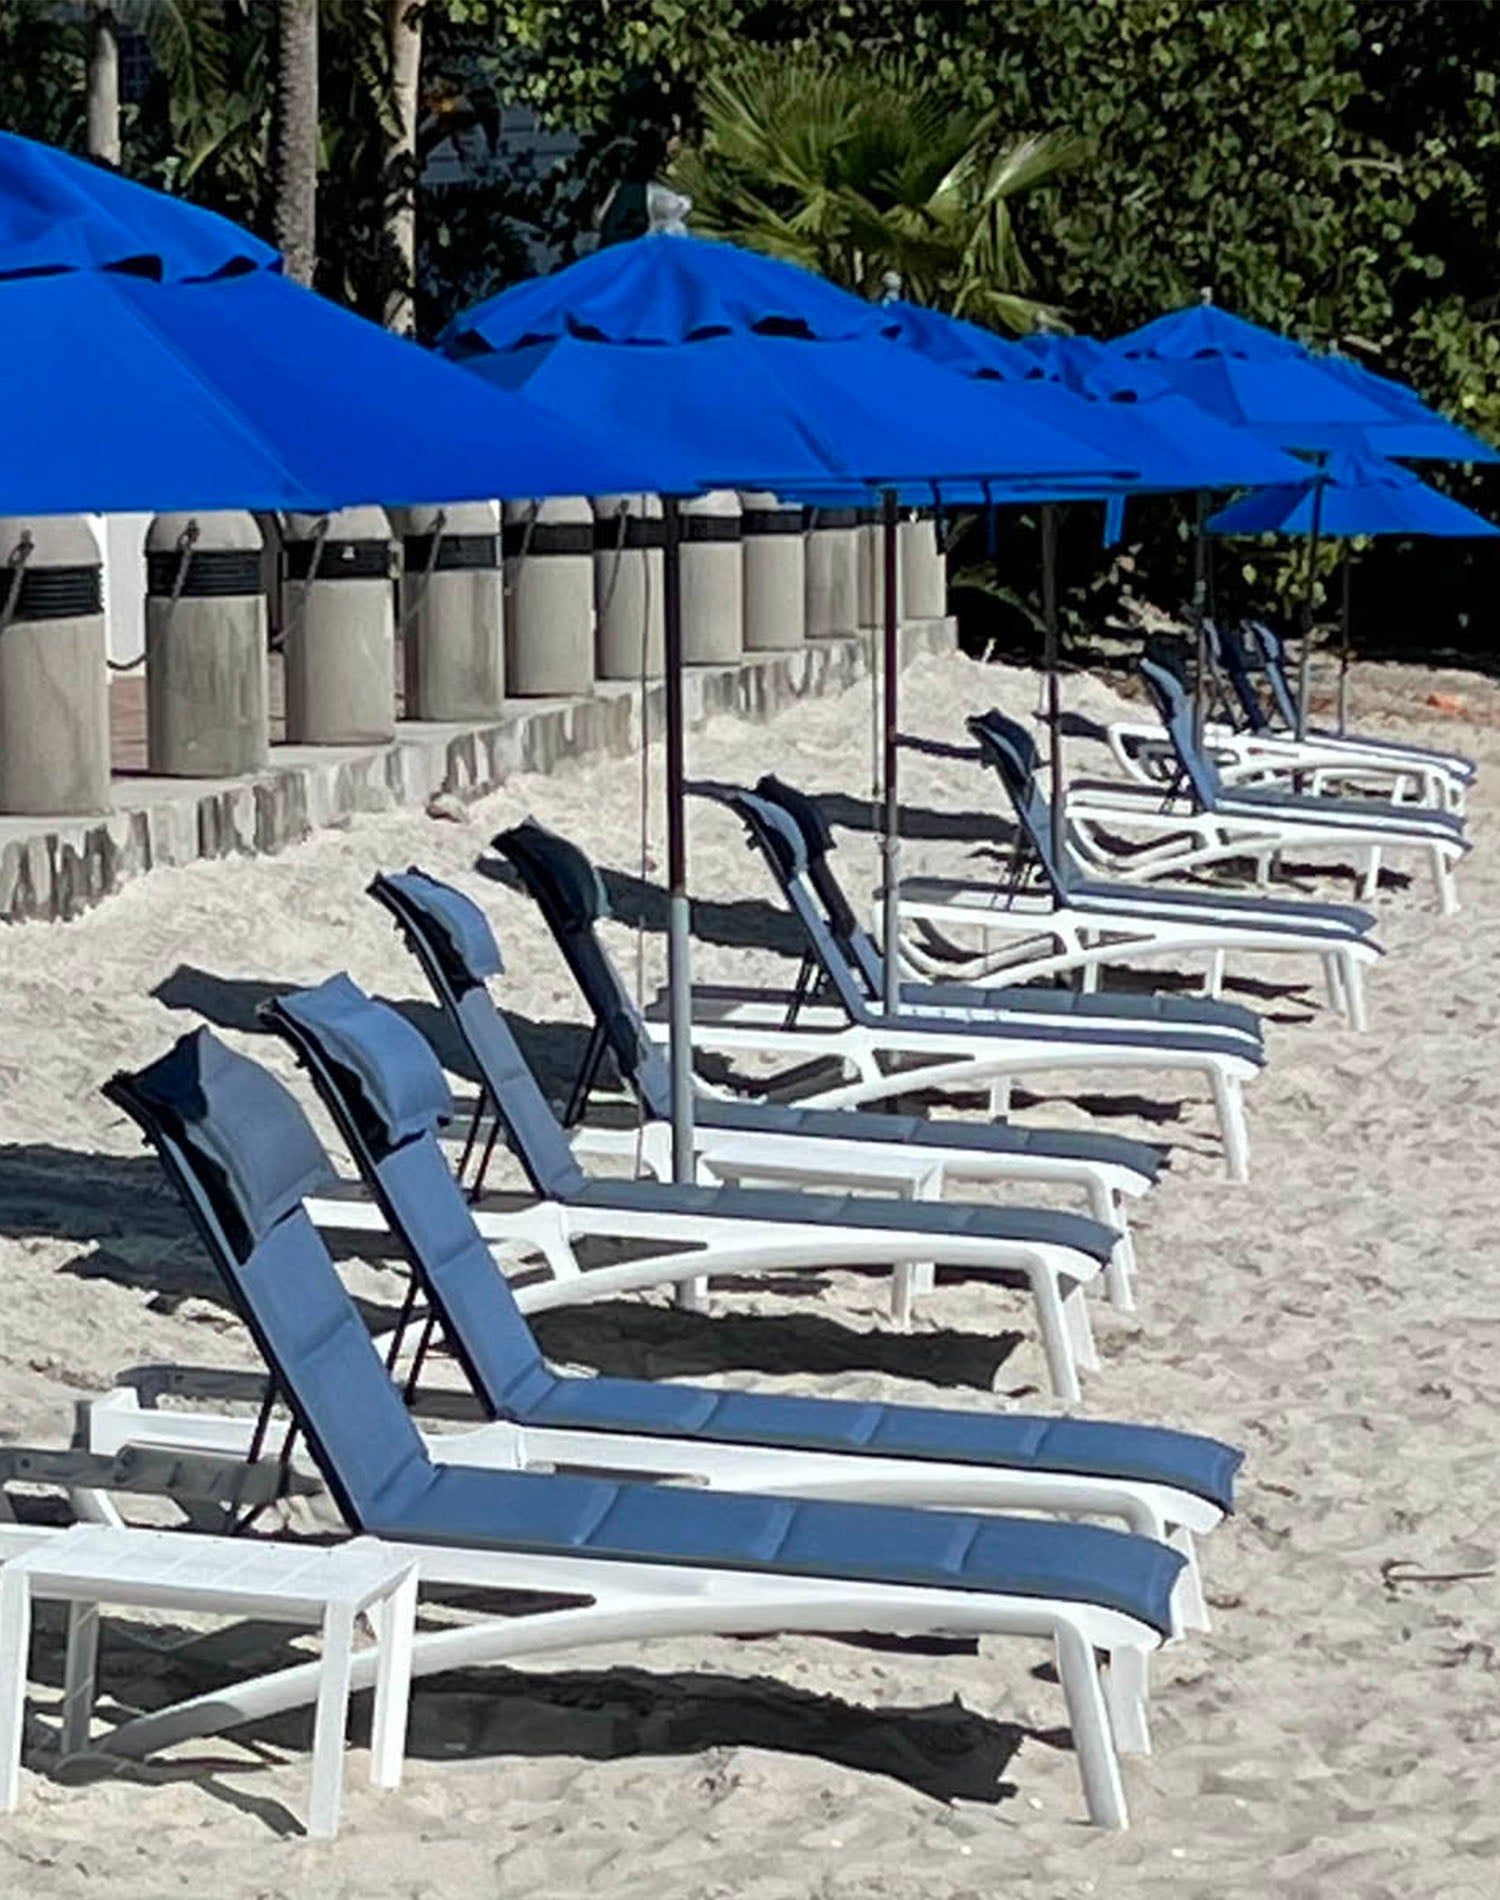 Sunset Comfort Chaises on the beach in Tampa Bay, Florida